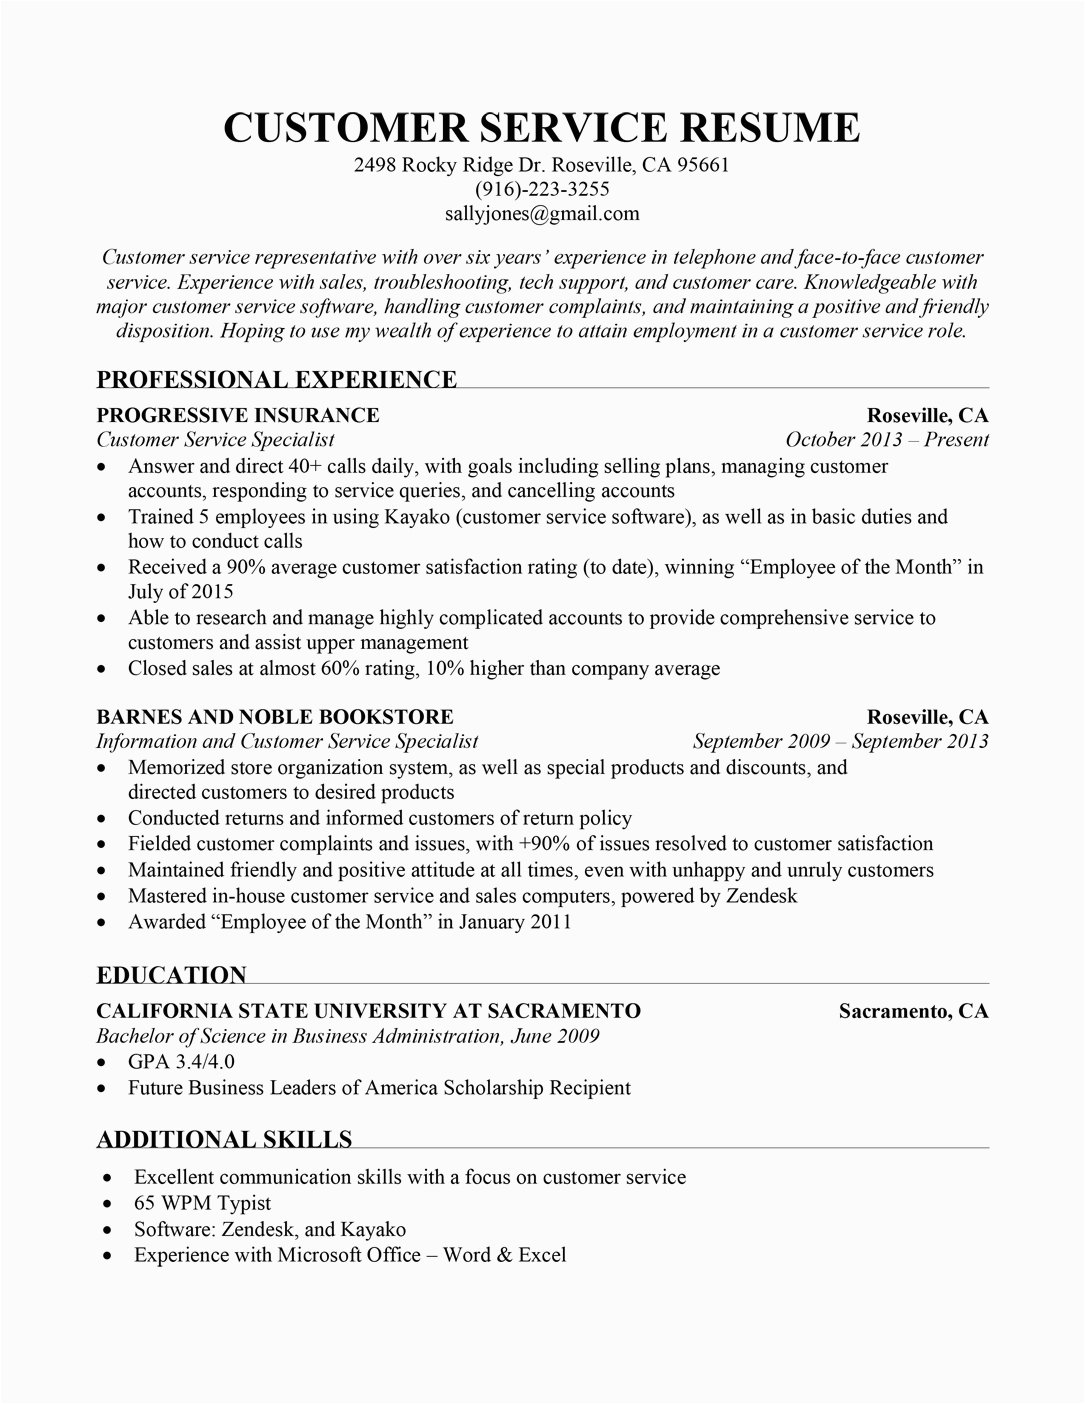 Sample Resumes for Jobs In Customer Service Customer Service Resume Sample Resume Panion